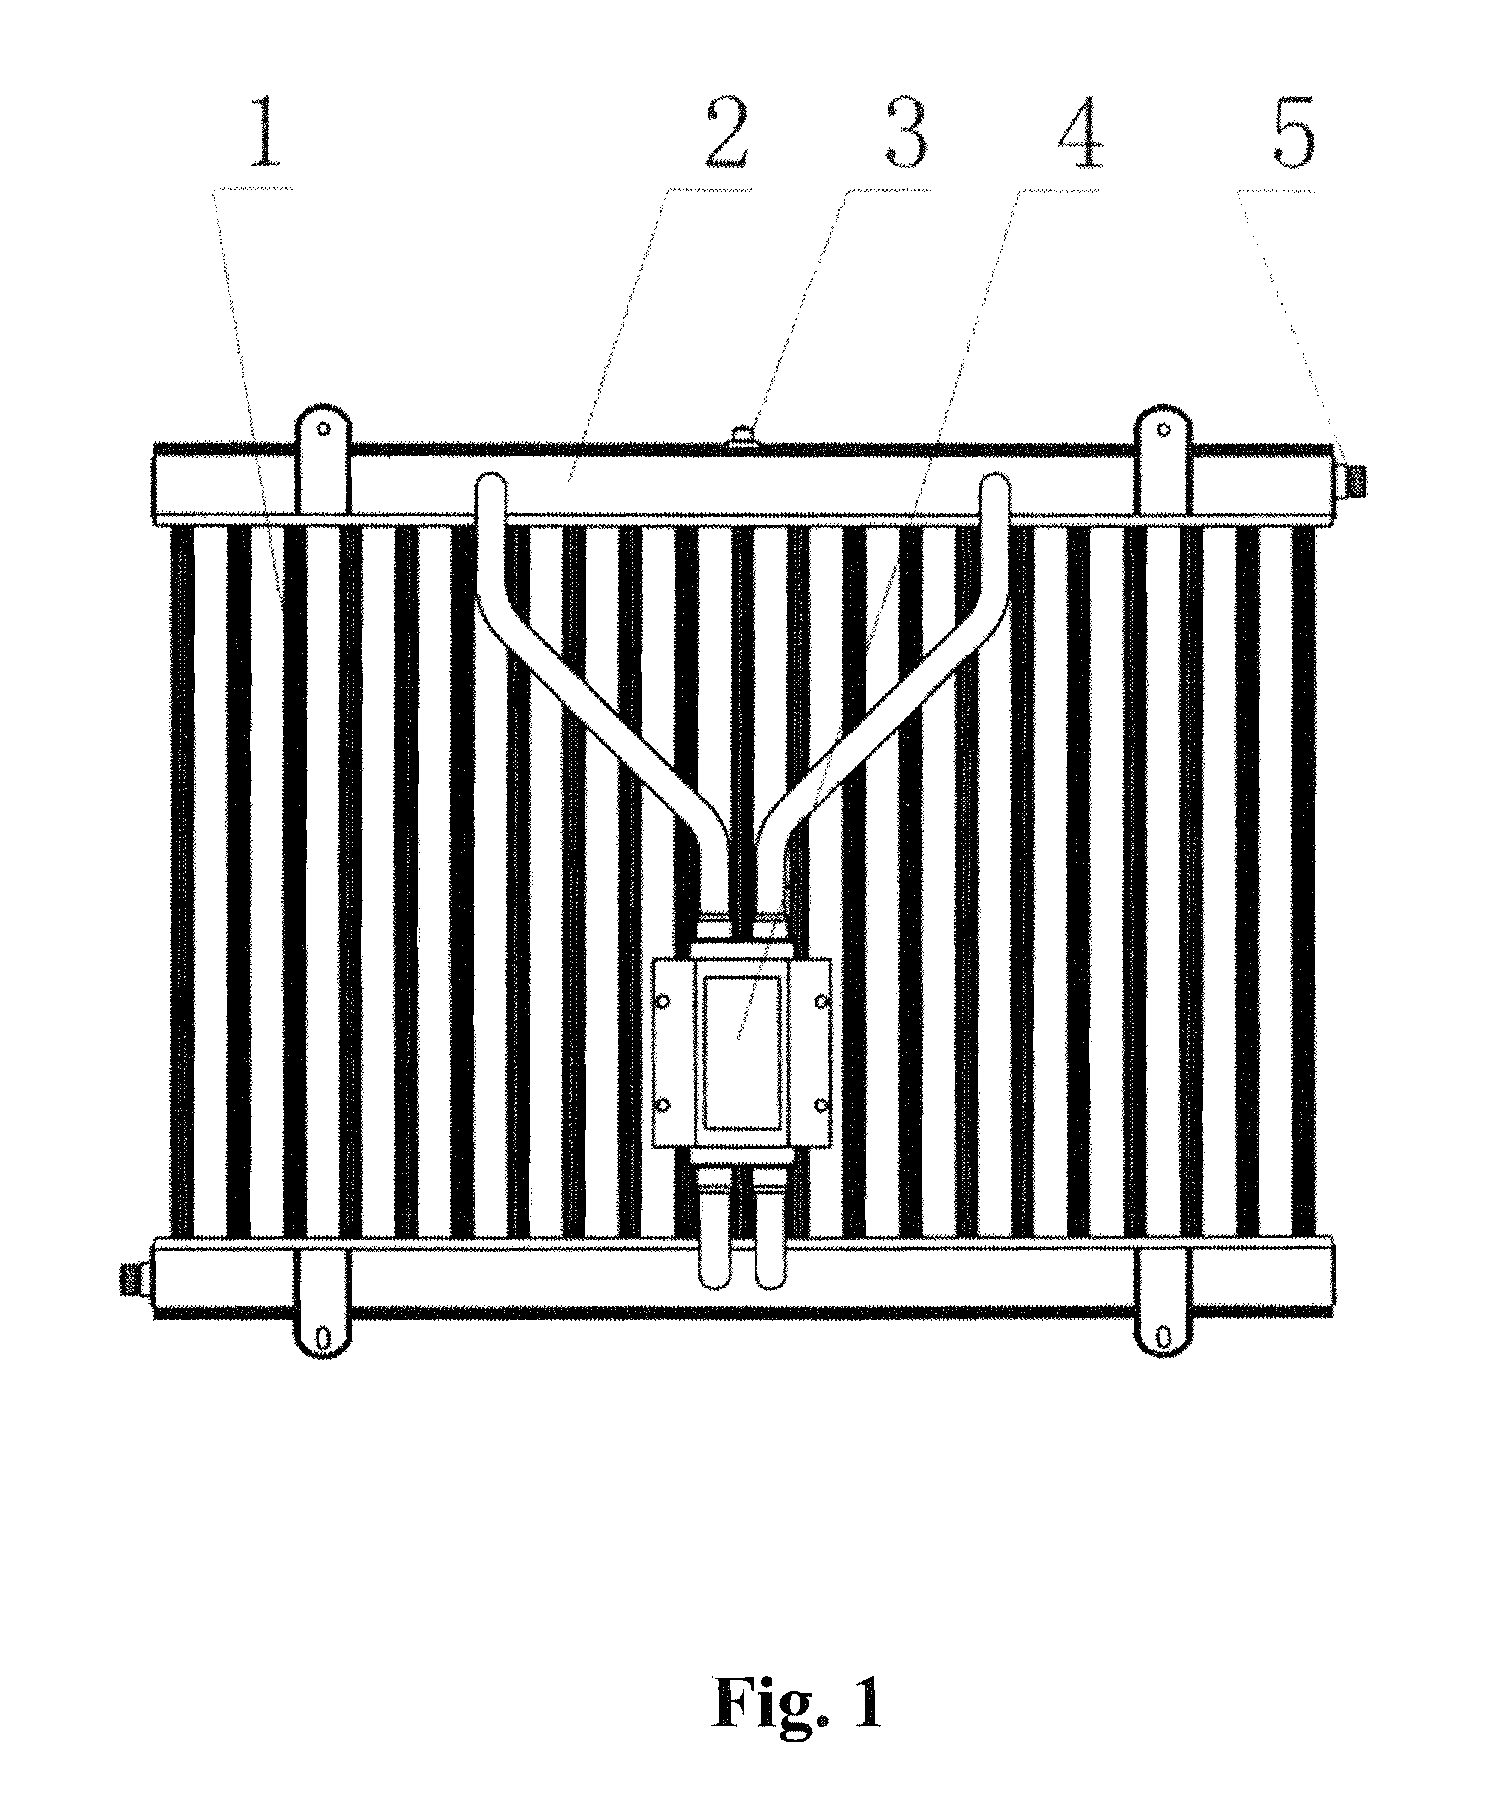 Fin-pipe shaped radiator specially adapted to a semiconductor chilling unit and the method of making same